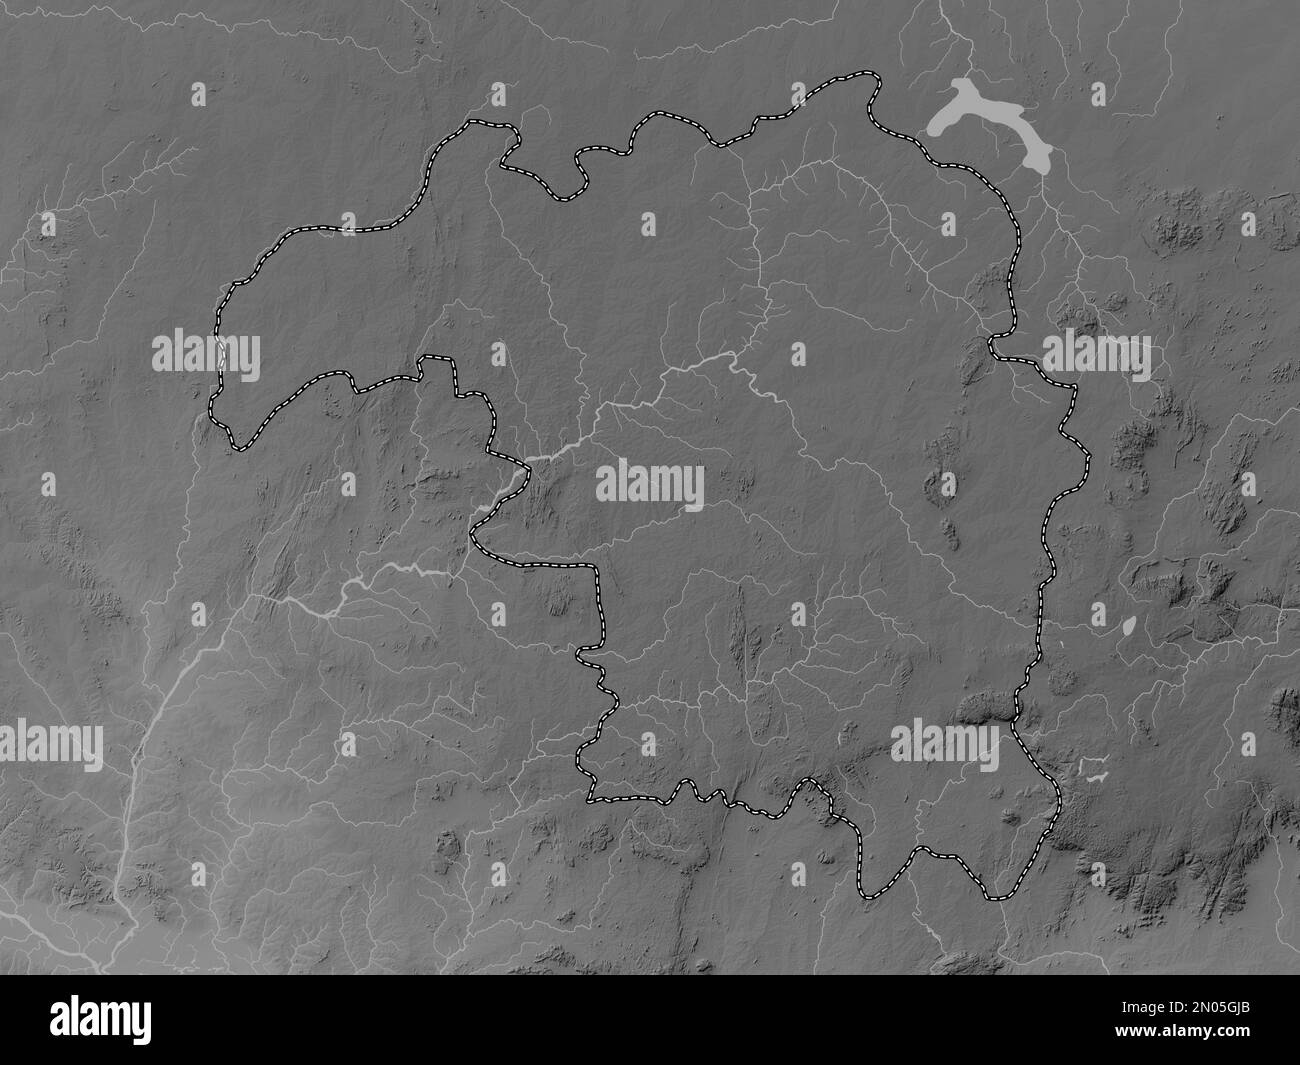 Kaduna, state of Nigeria. Grayscale elevation map with lakes and rivers Stock Photo